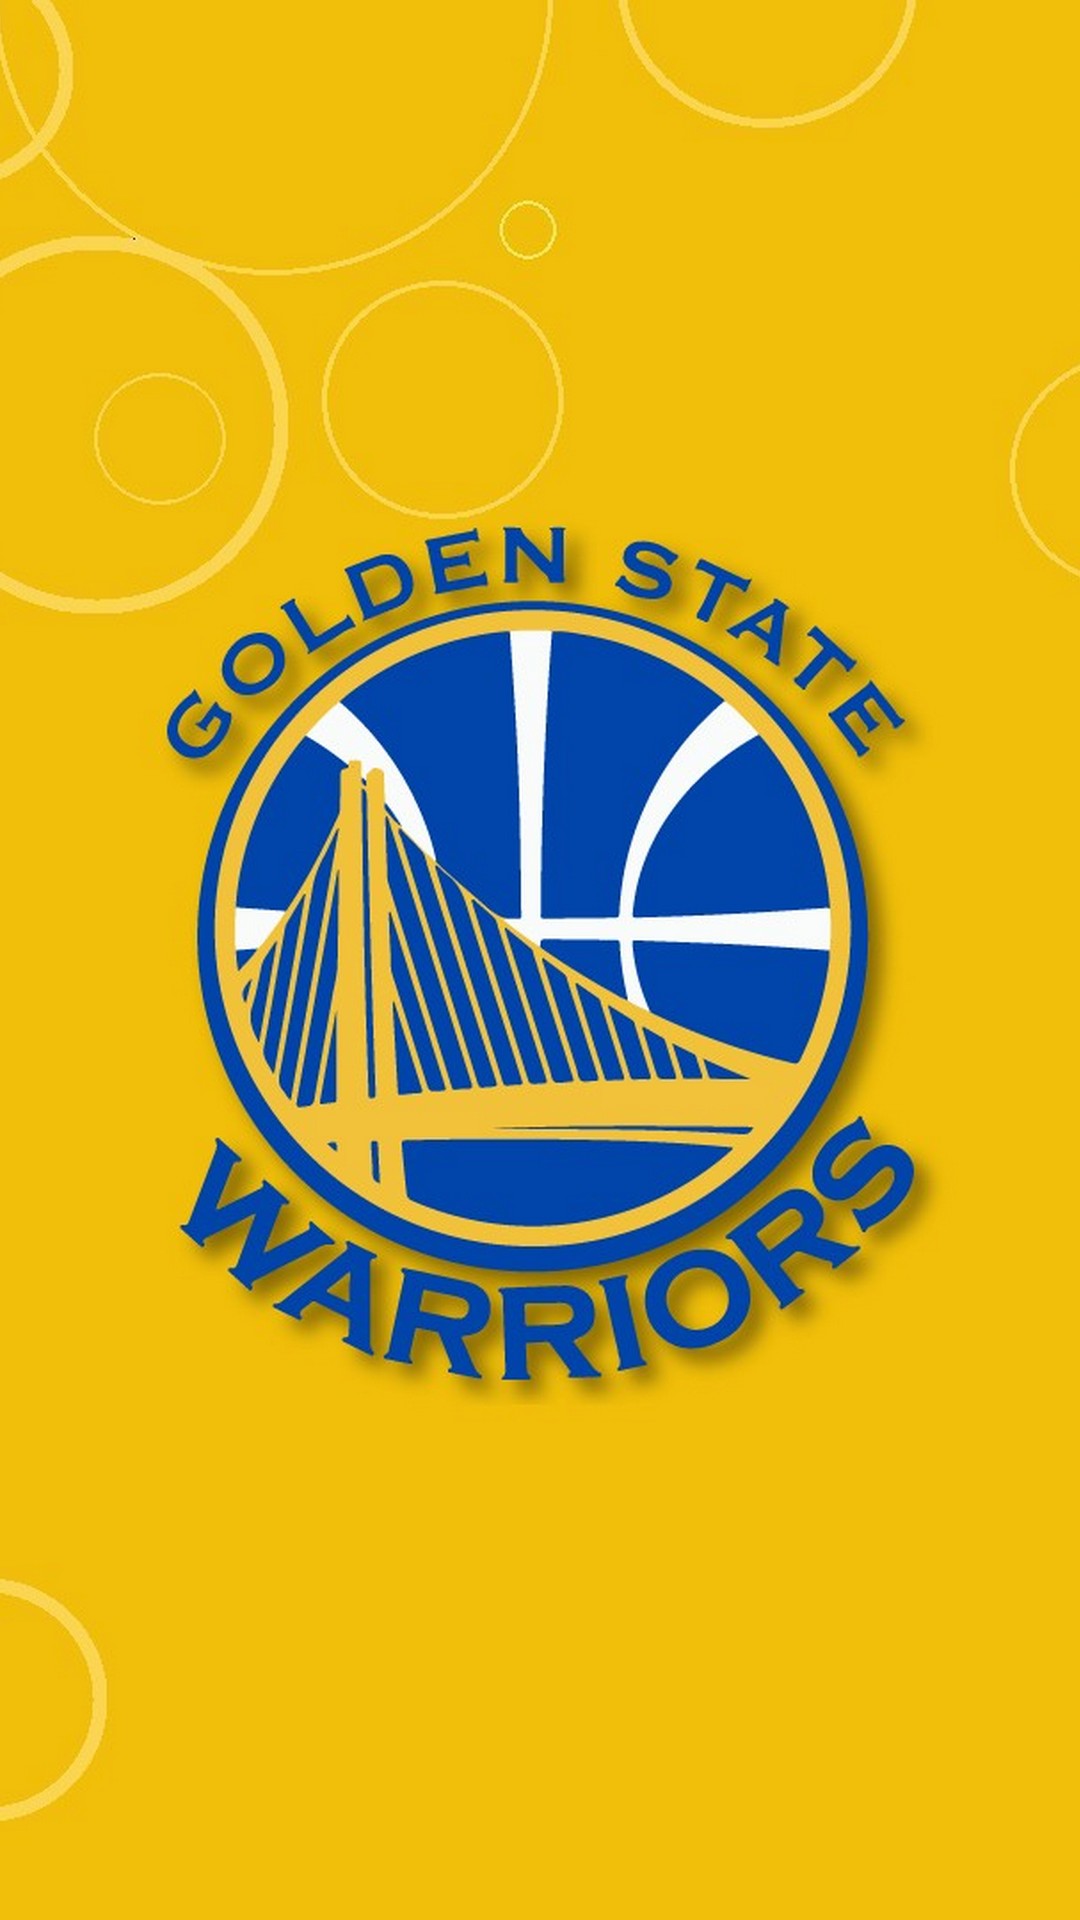 Wallpaper Android Golden State Warriors With Image - Golden State Warriors , HD Wallpaper & Backgrounds